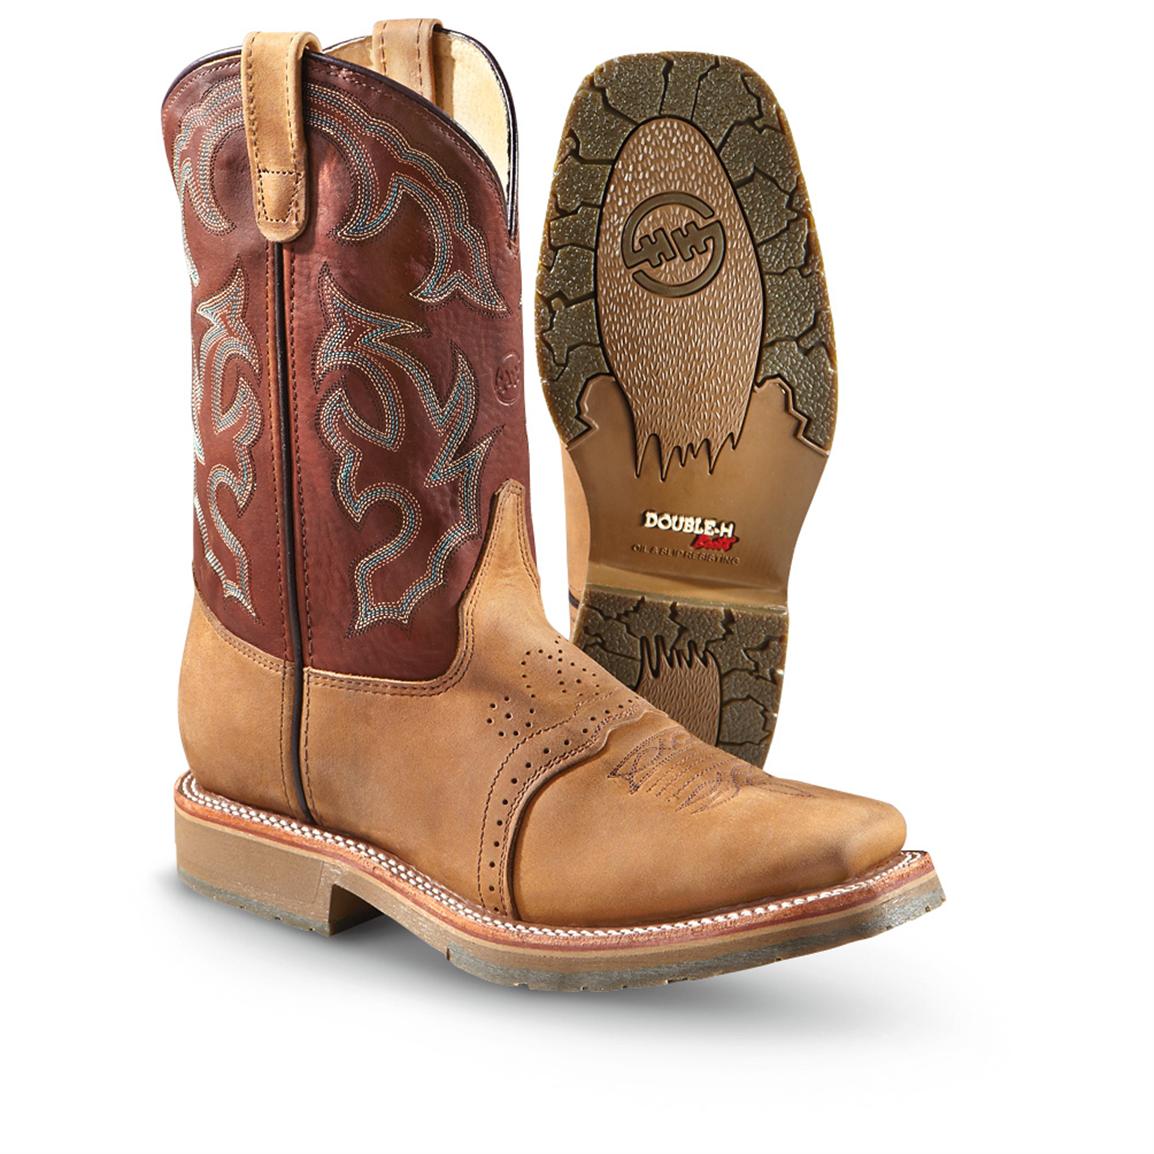 Western Work Boots For Men | FP Boots